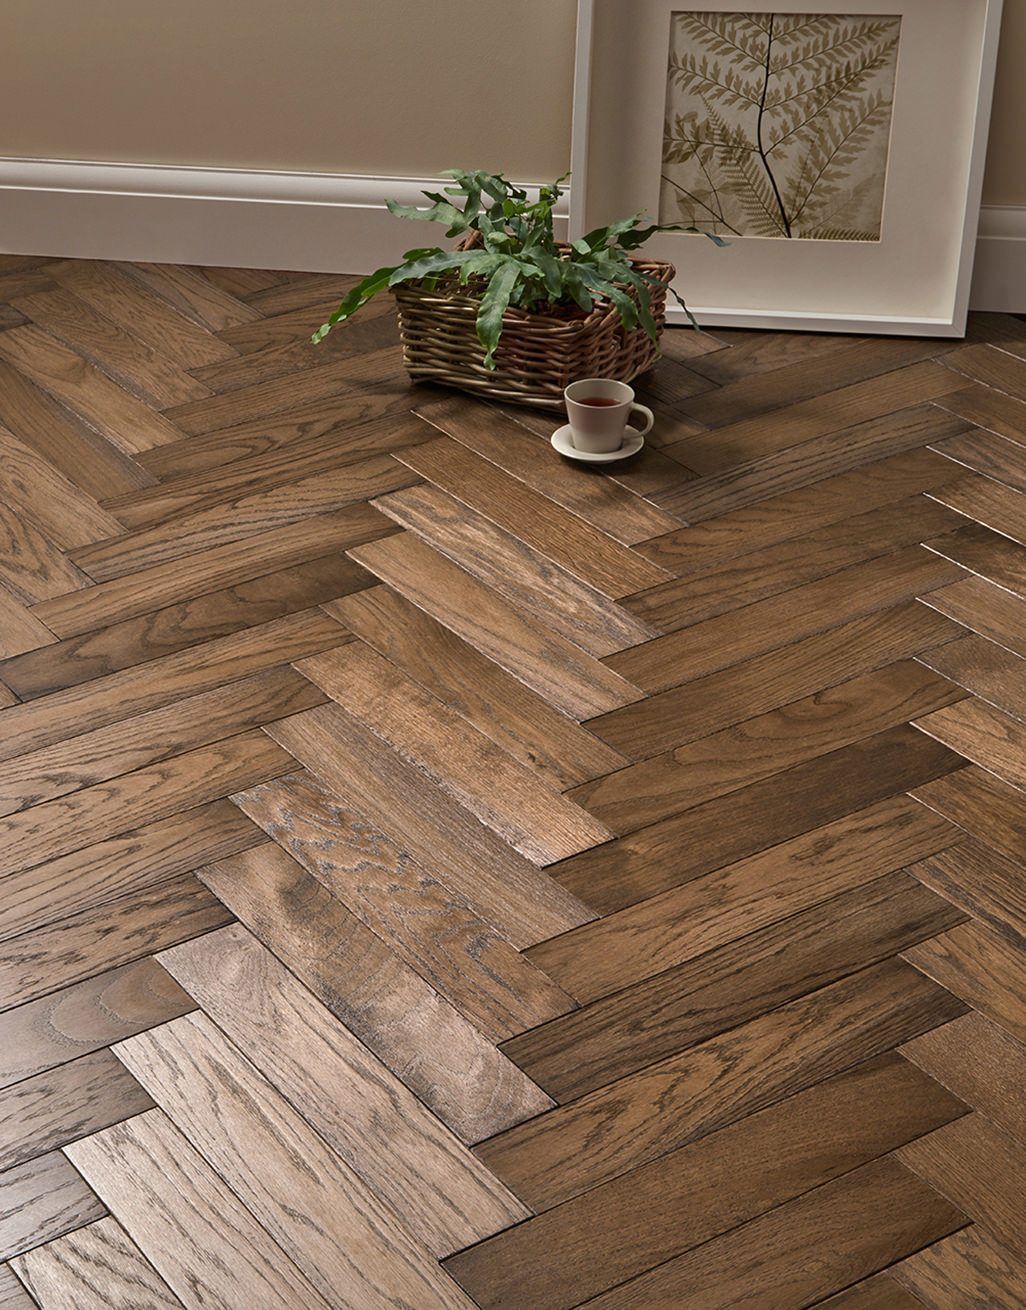 Know more about solid wood flooring